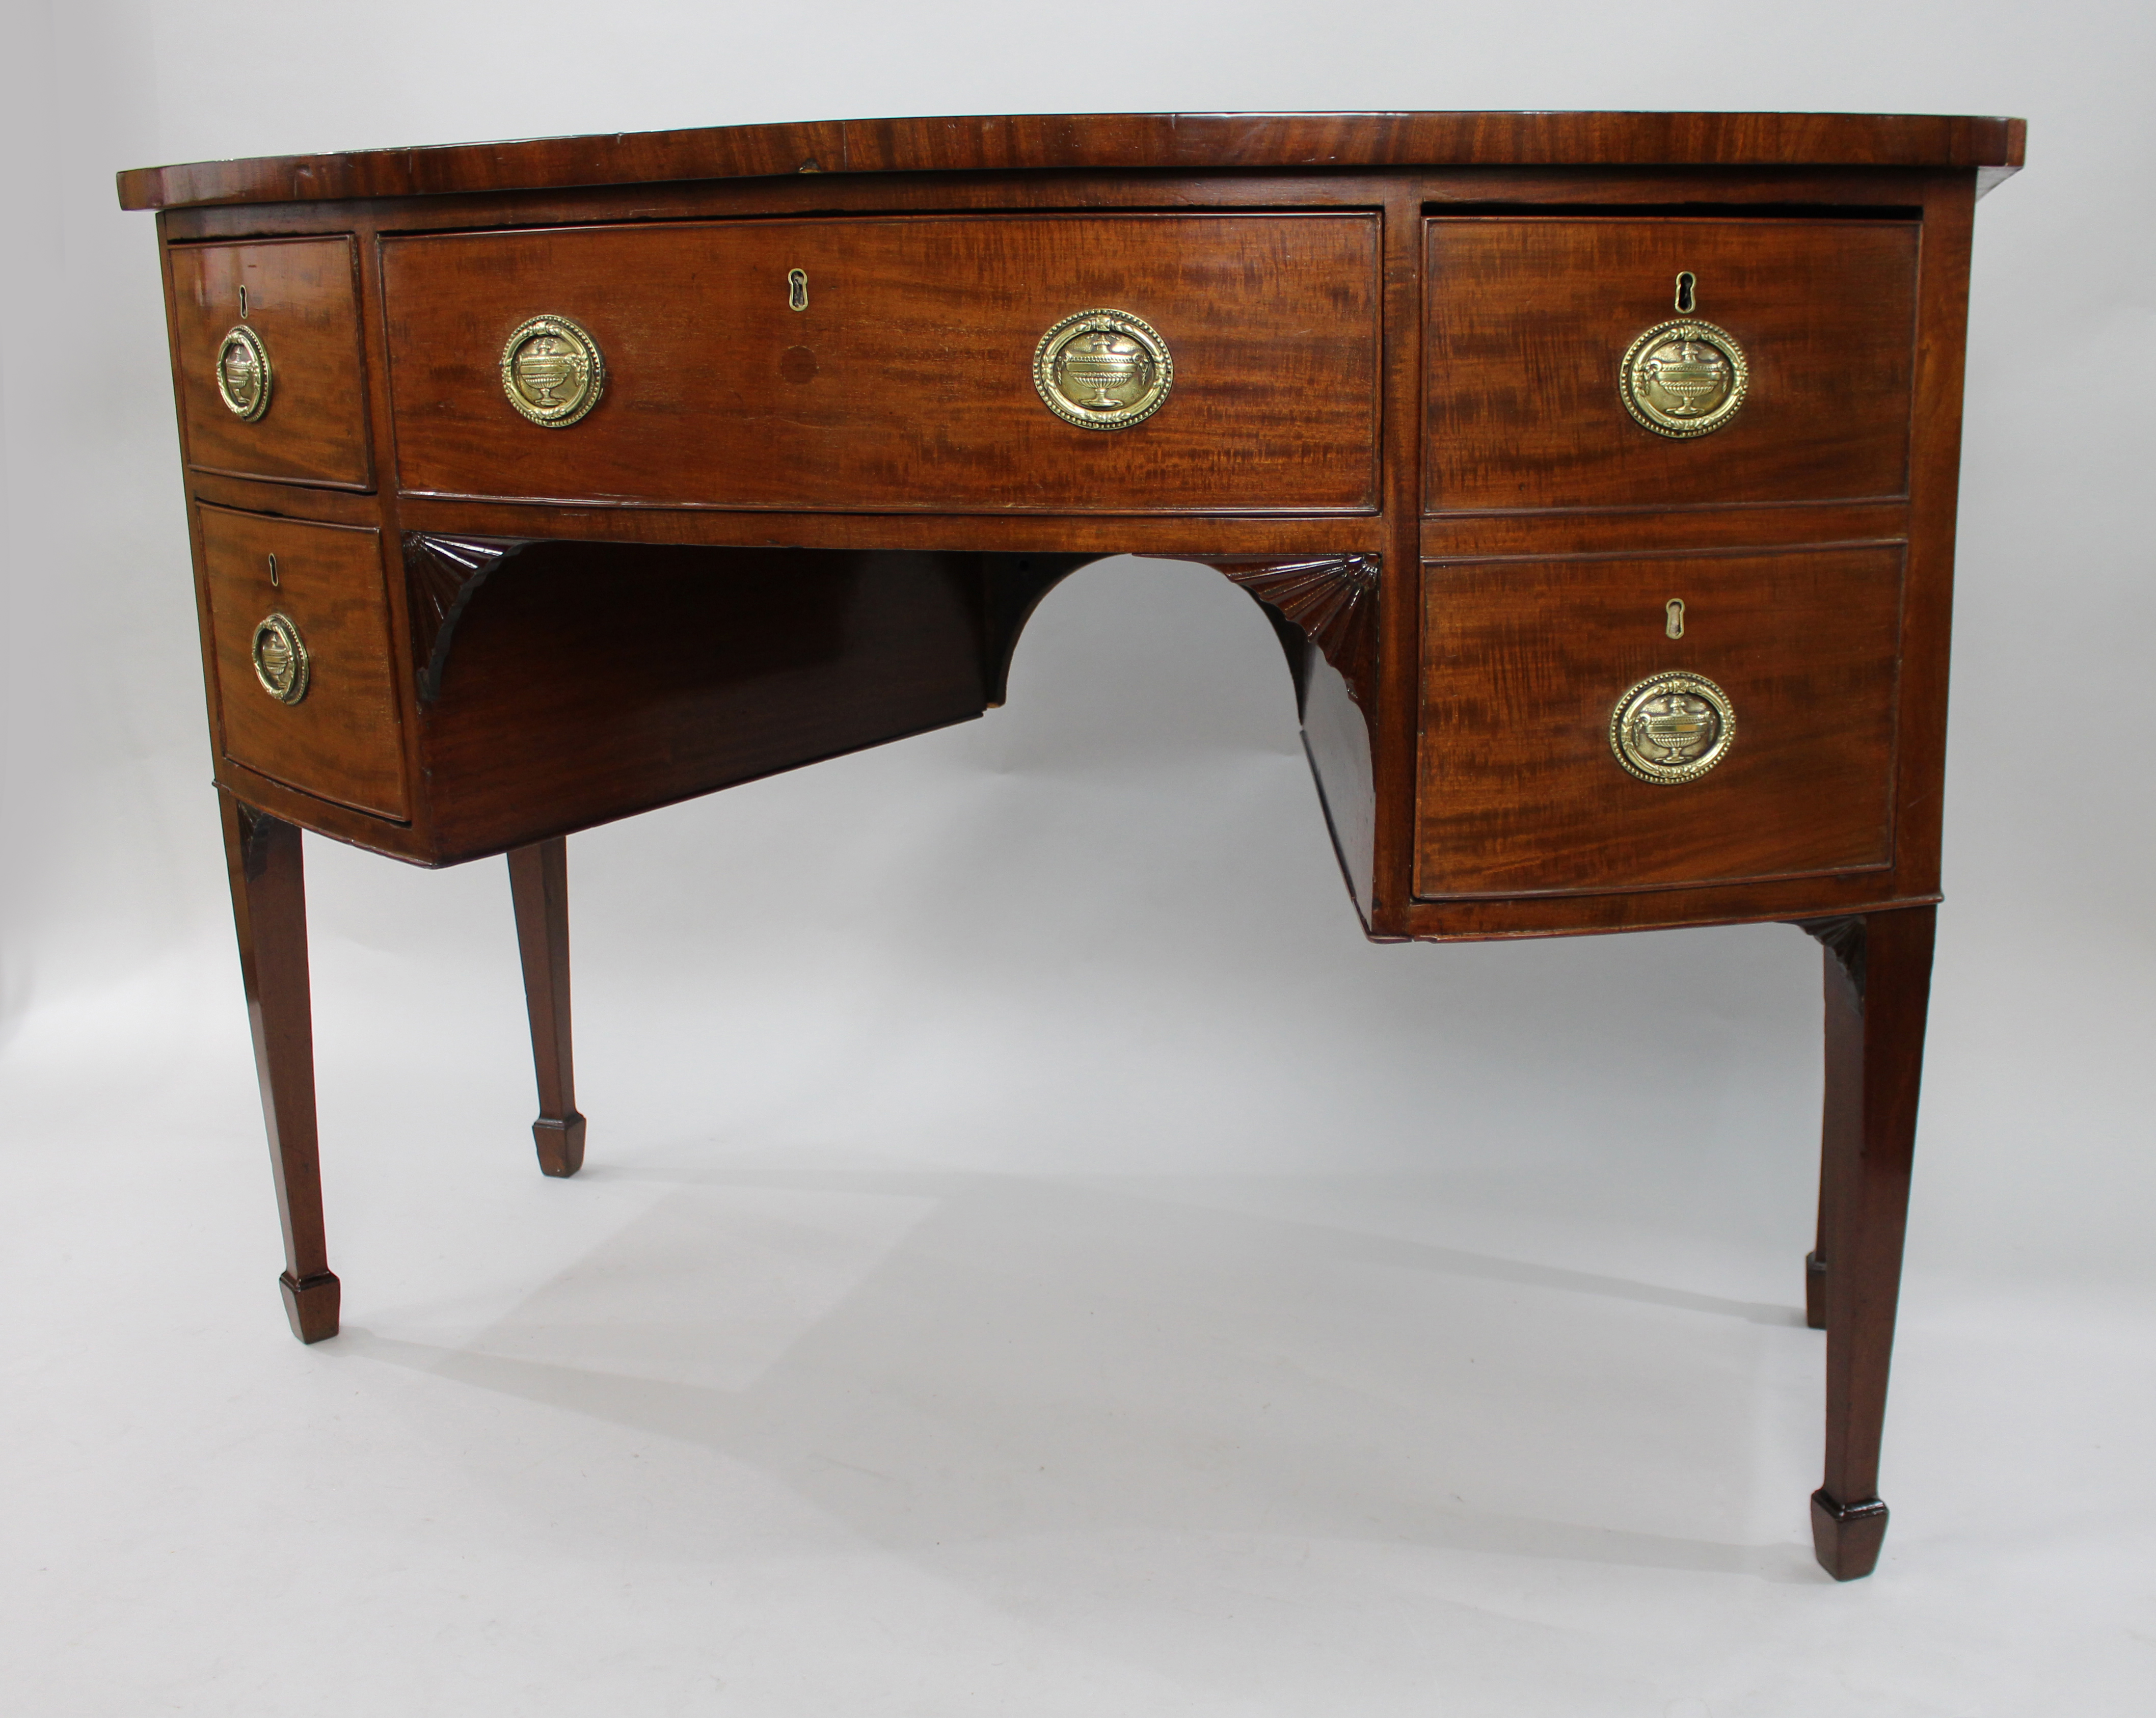 George III Mahogany Bow Fronted Serving Table - Image 4 of 8